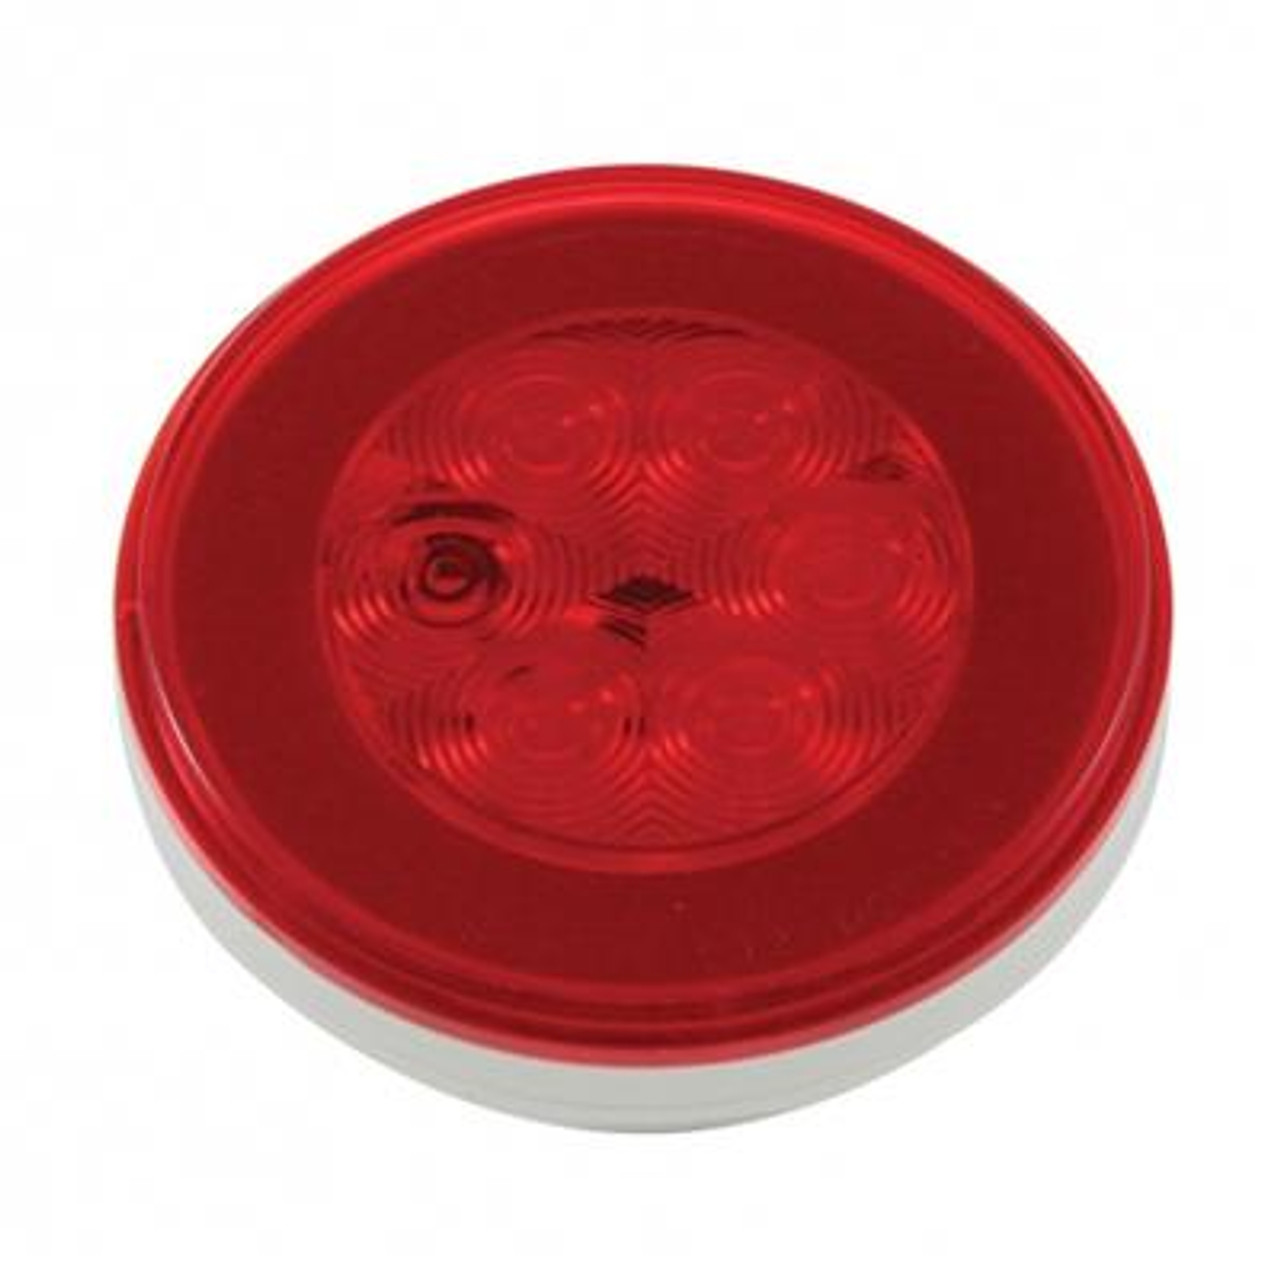 21 LED 4" Round GloLight (Stop, Turn & Tail) - Red LED/Red Lens